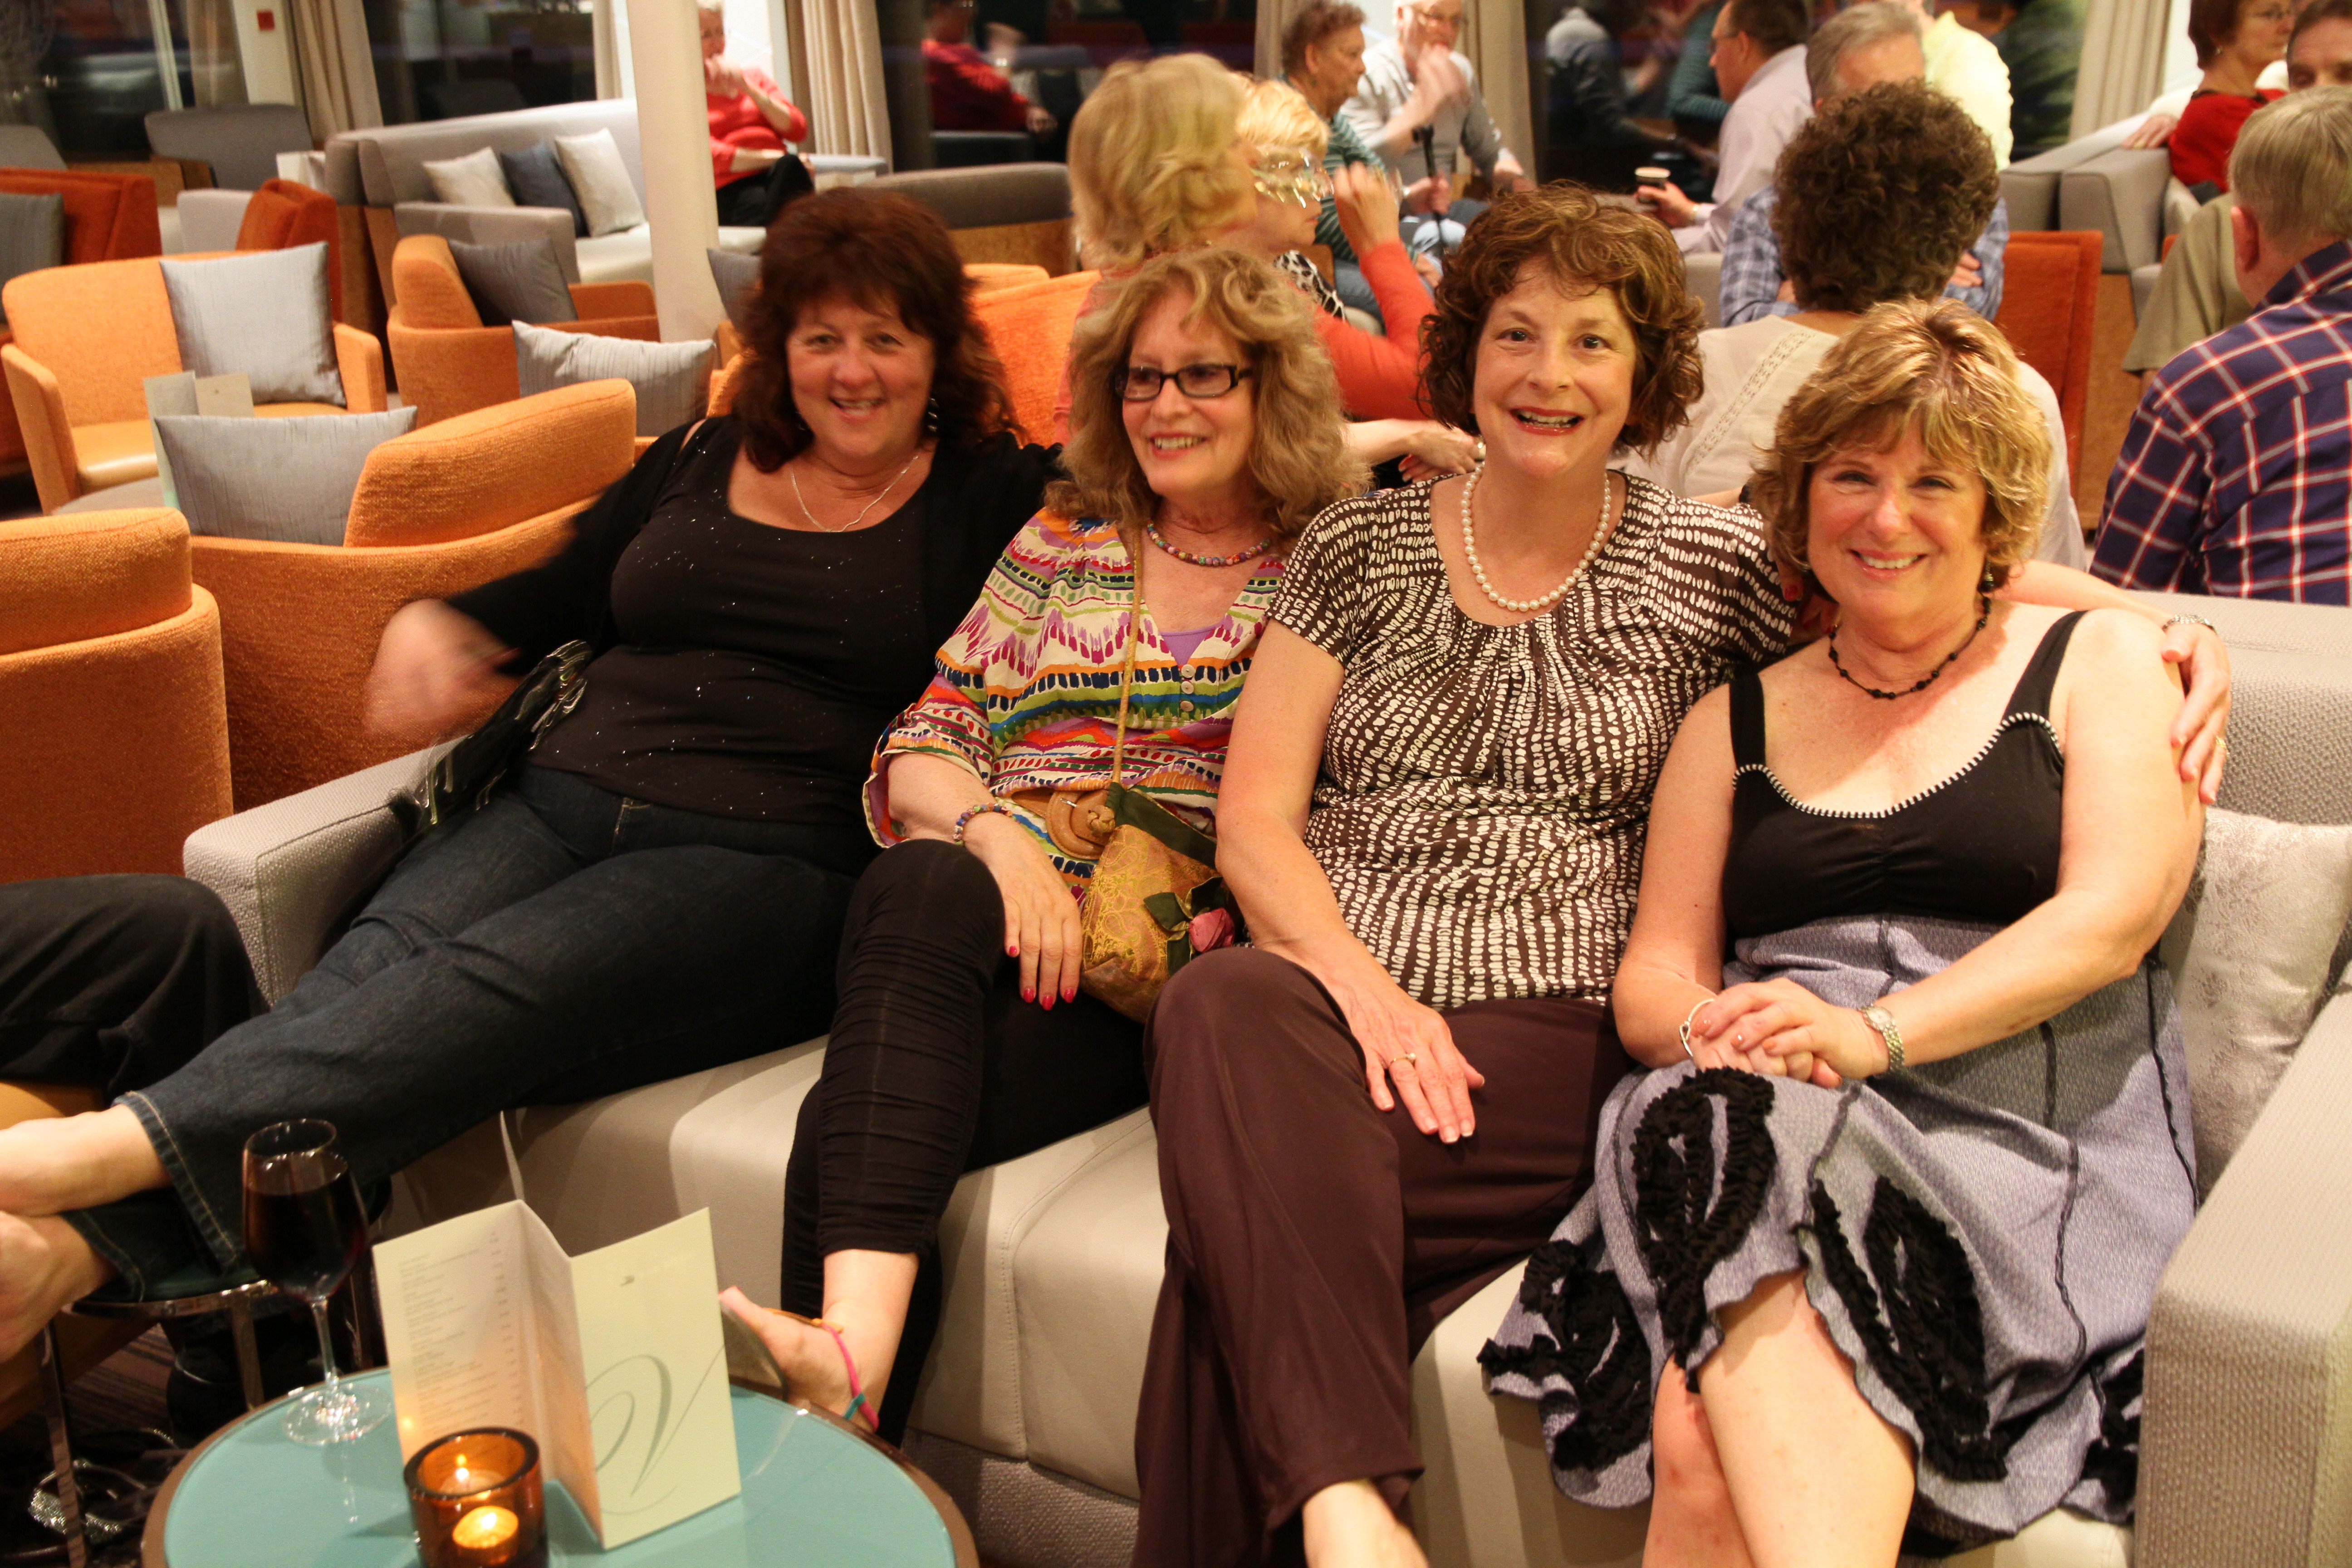 The ladies in the lounge